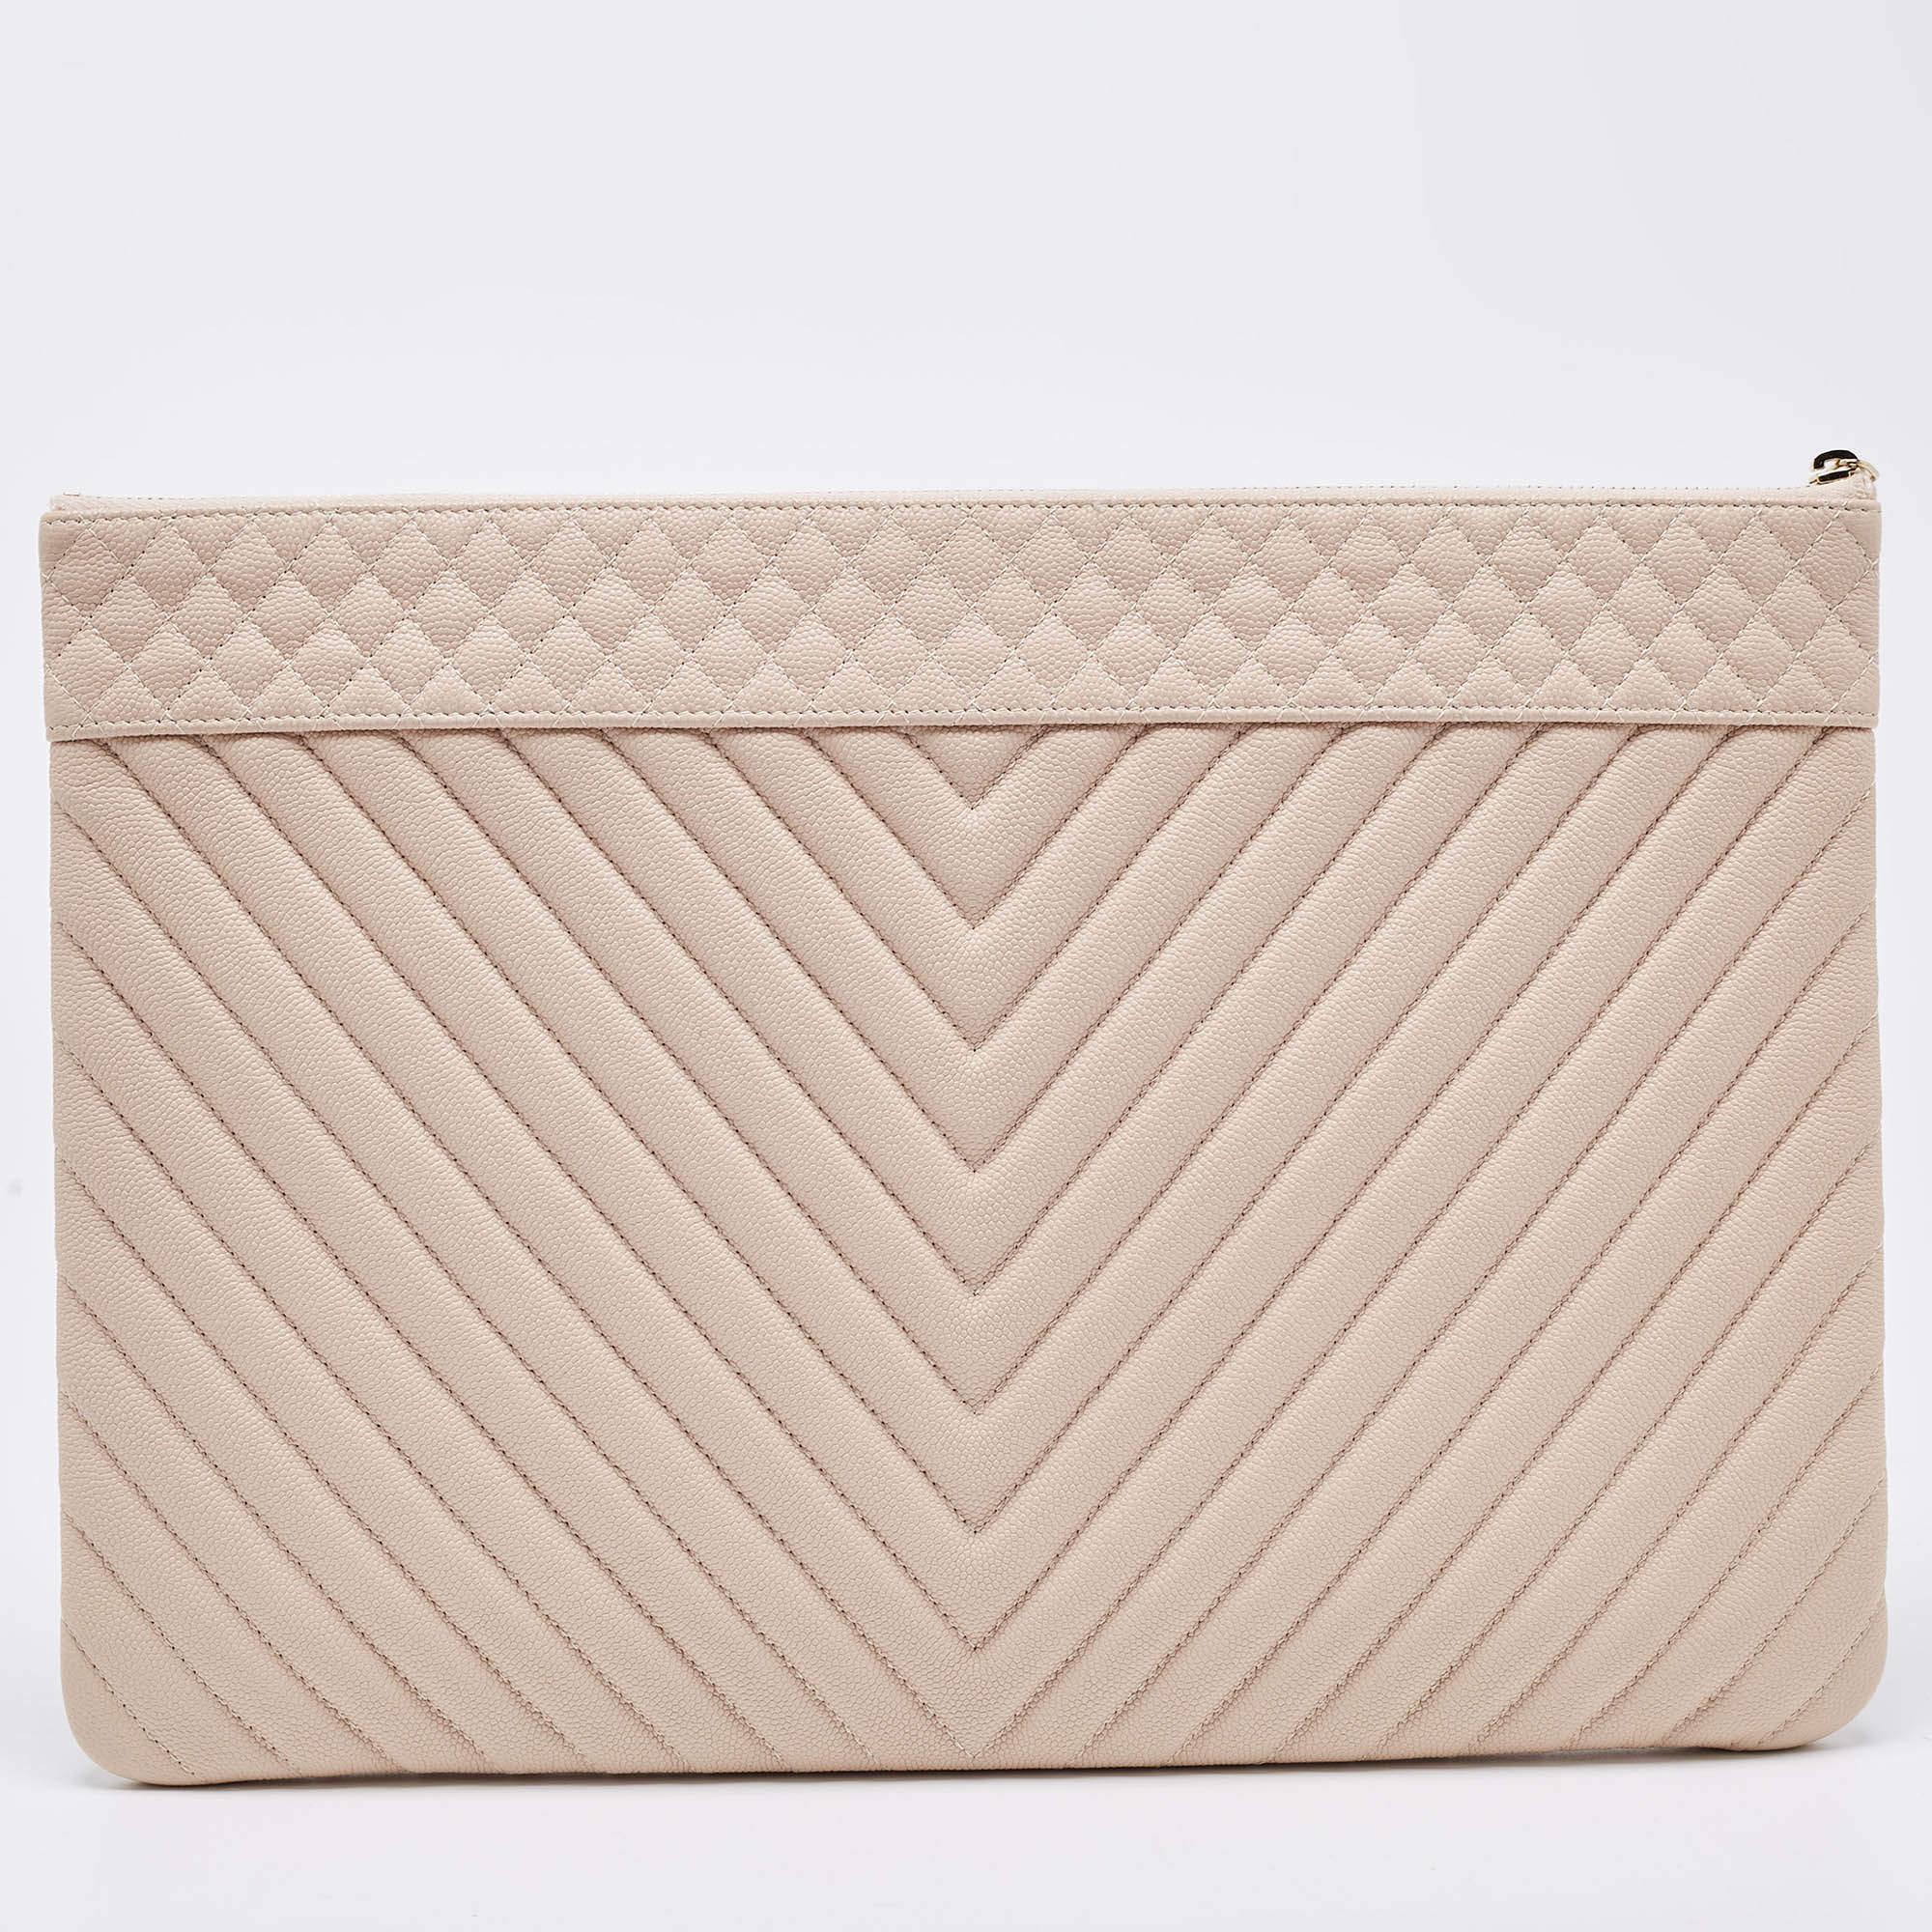 This pouch from Chanel will surely add glam to your style. Designed with a dash of blushed pink color, this pouch is crafted from leather and features chevron quilts. This sleek piece is handy and comes with a fabric-lined interior that is secured